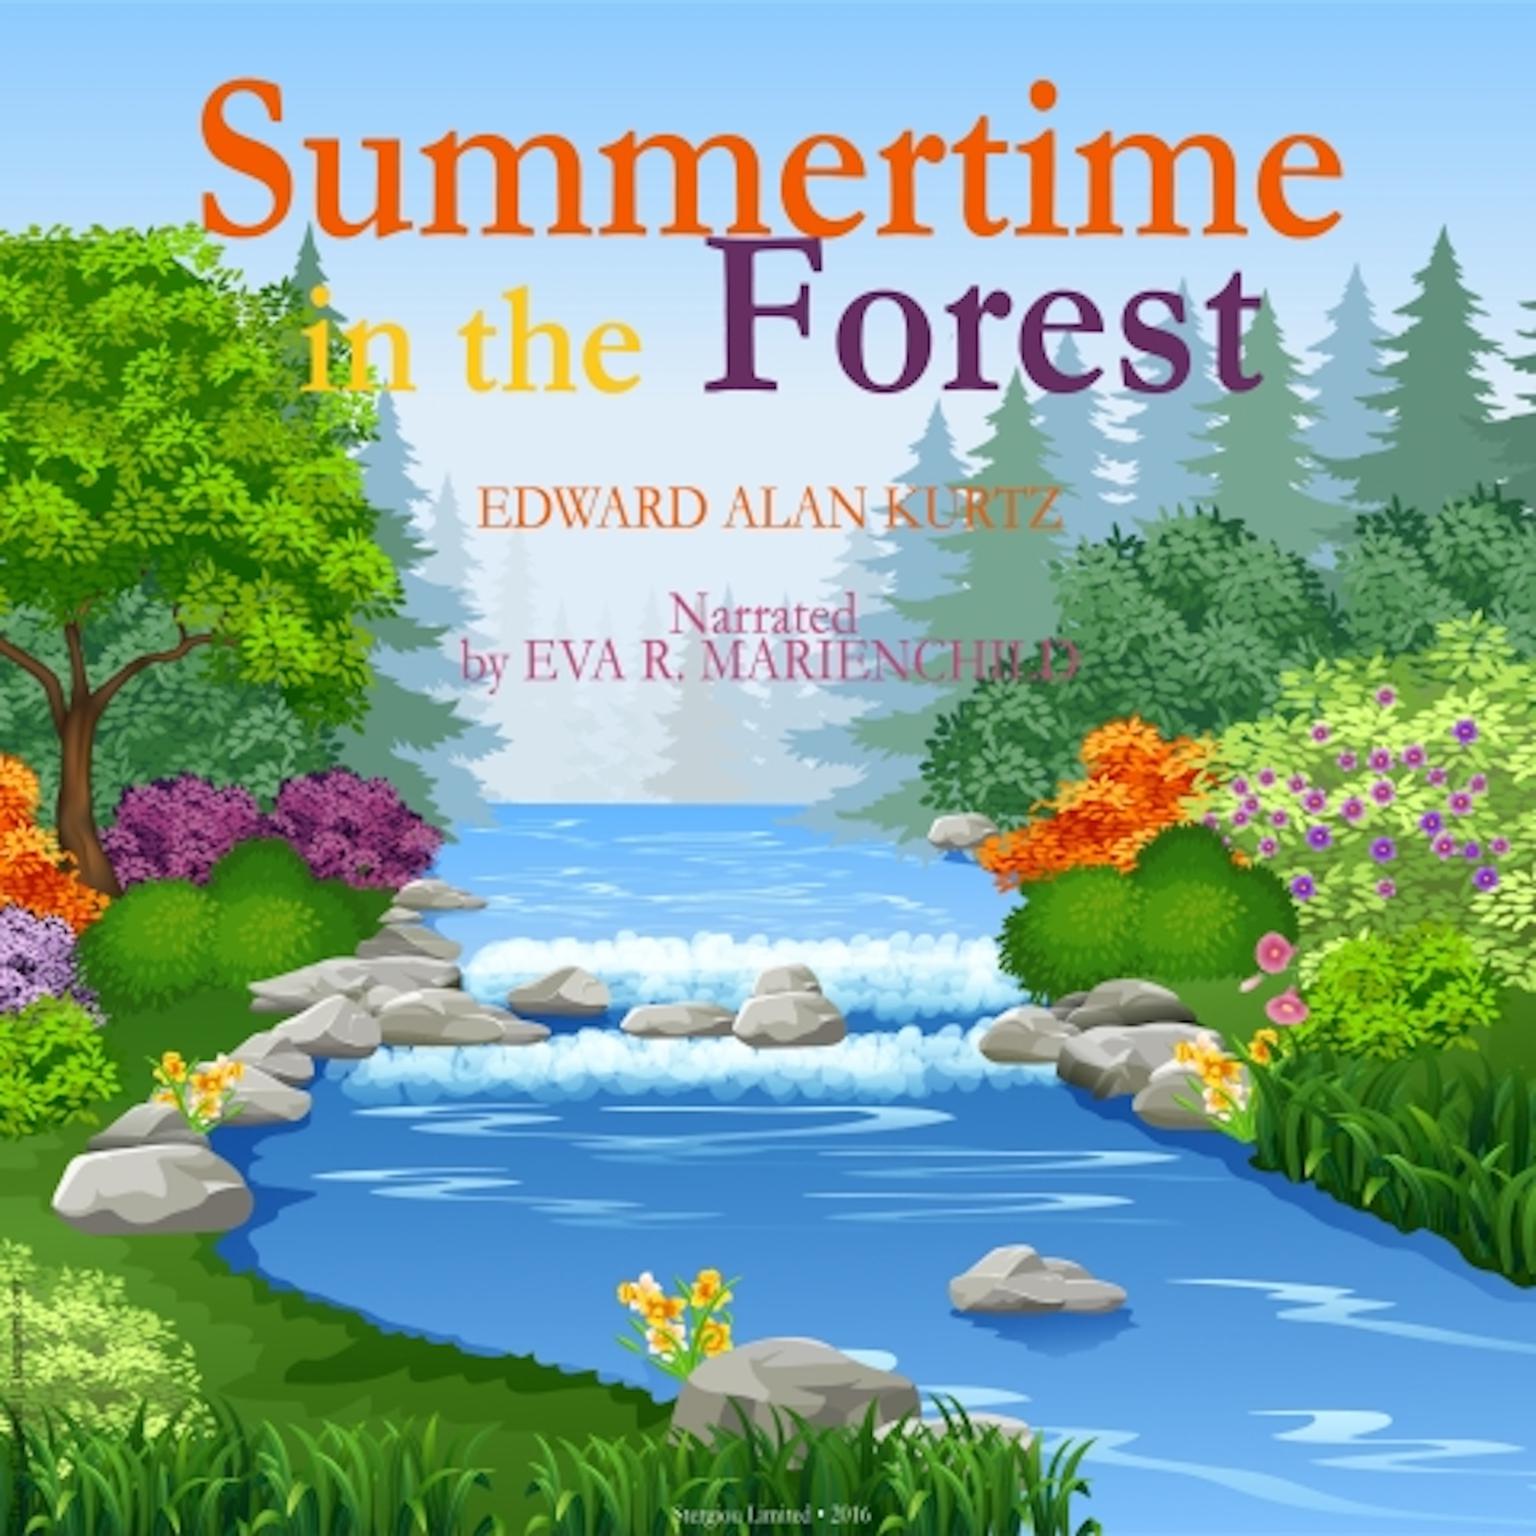 Summertime in the Forest Audiobook, by Edward Alan Kurtz